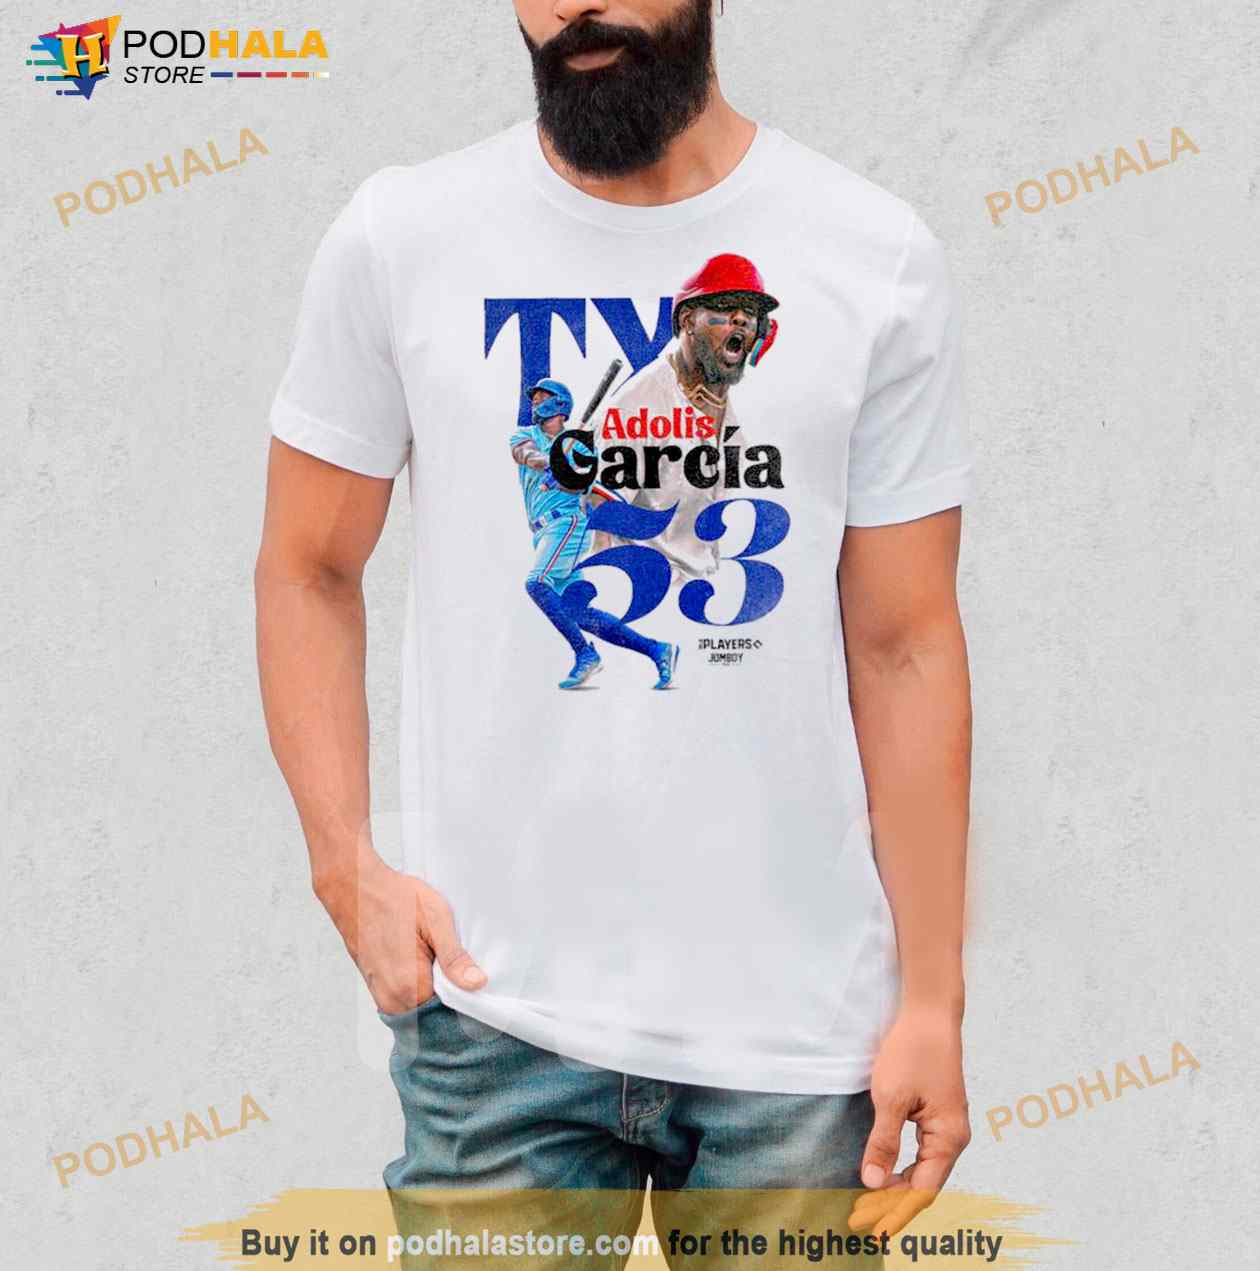 Adolis Garcia El Bombi TX Shirt - Bring Your Ideas, Thoughts And